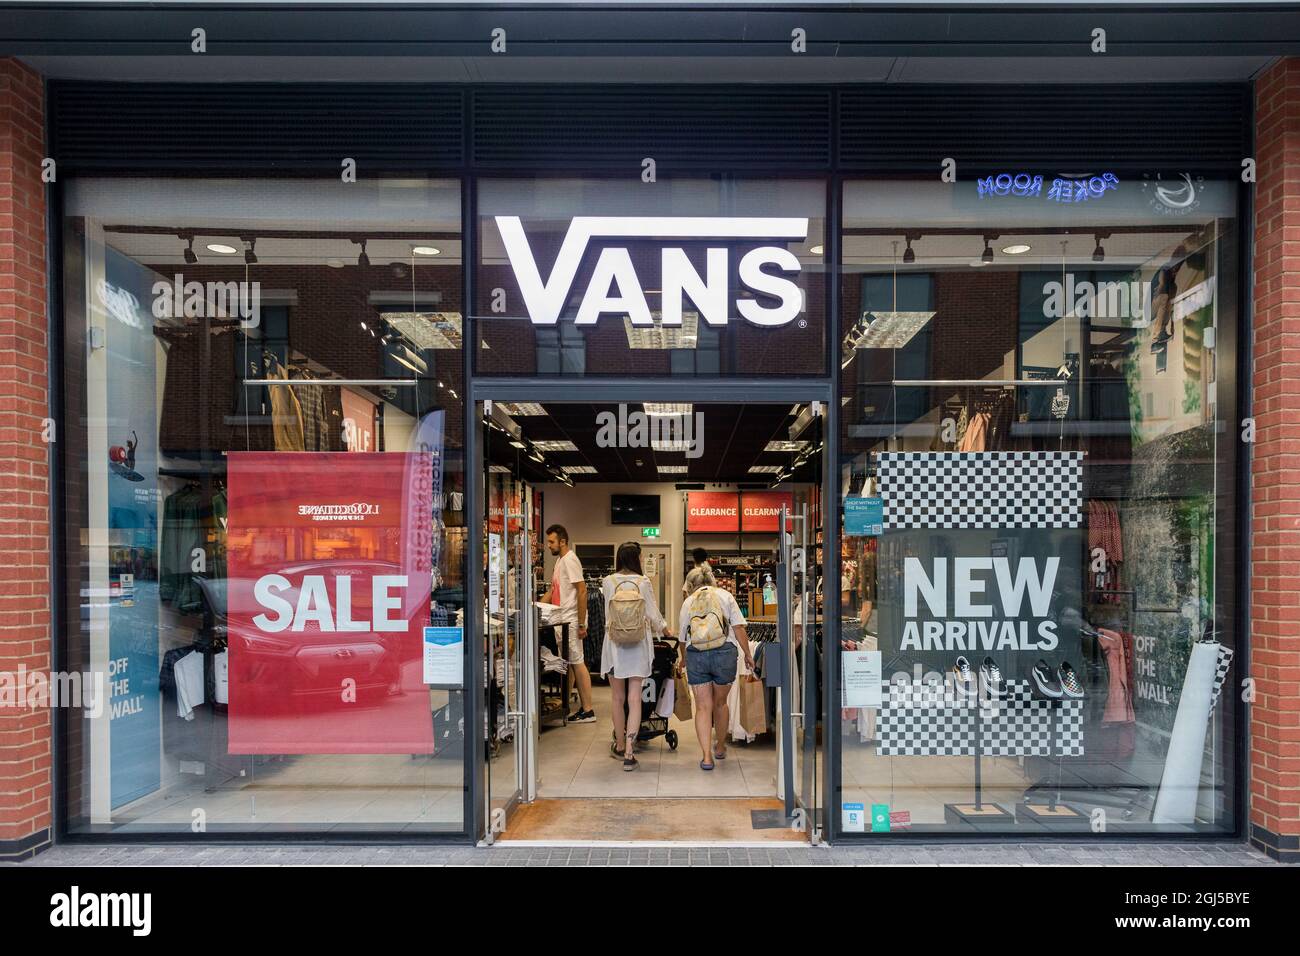 Vans Store High Resolution Stock and Images - Alamy